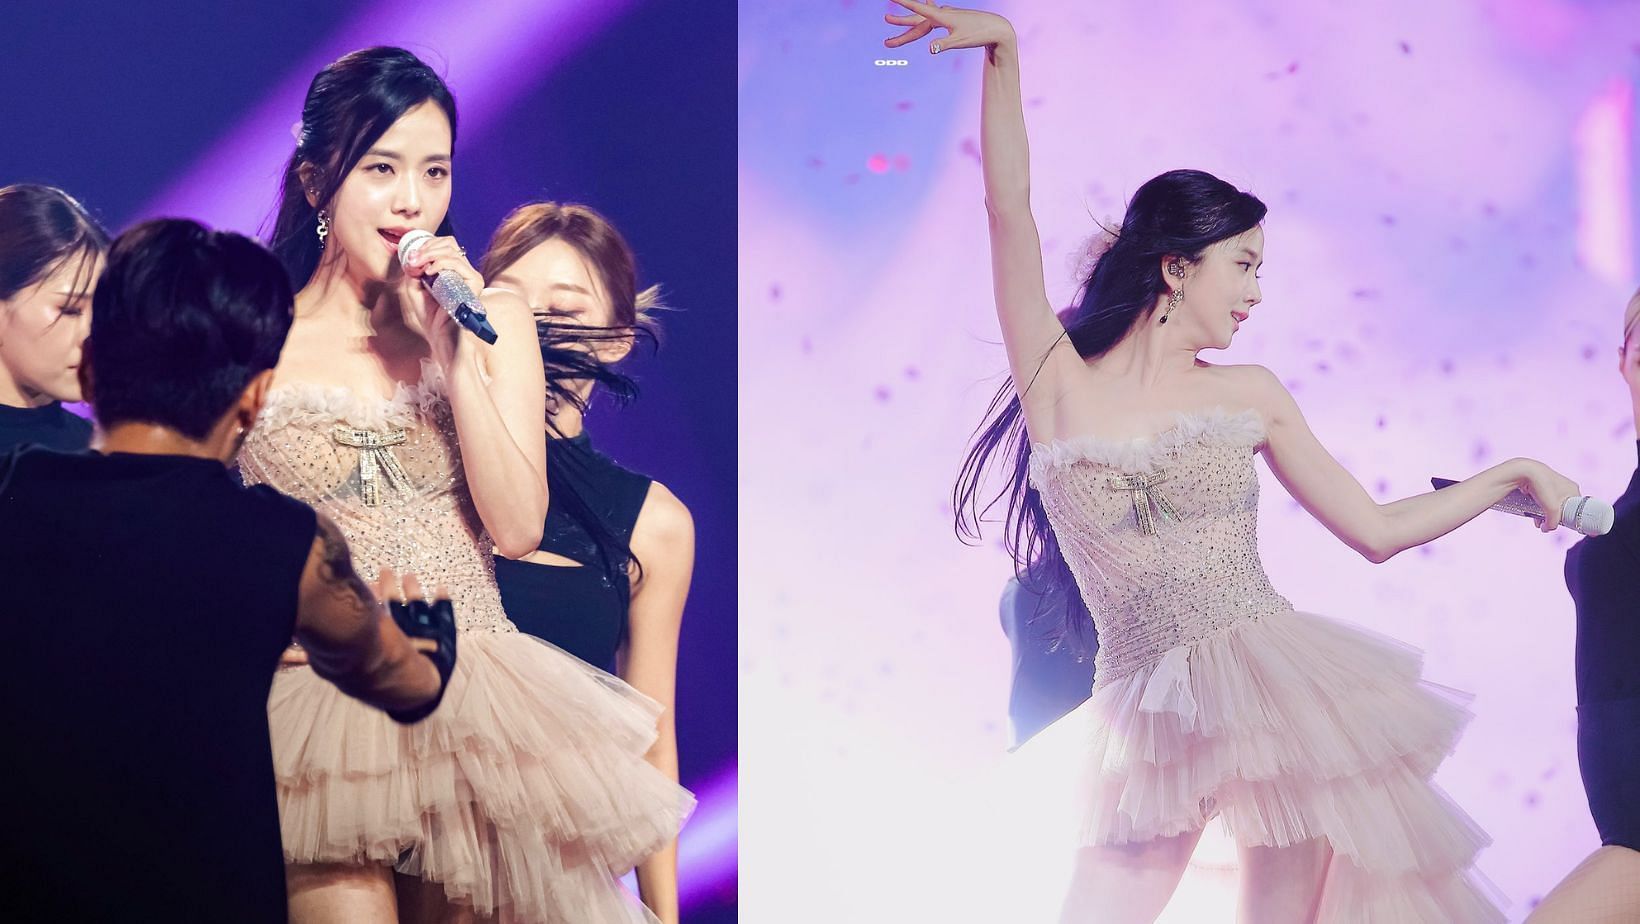 Featuring Kim Jisoo of BLACKPINK. (Images via Twitter/@timeless_103)